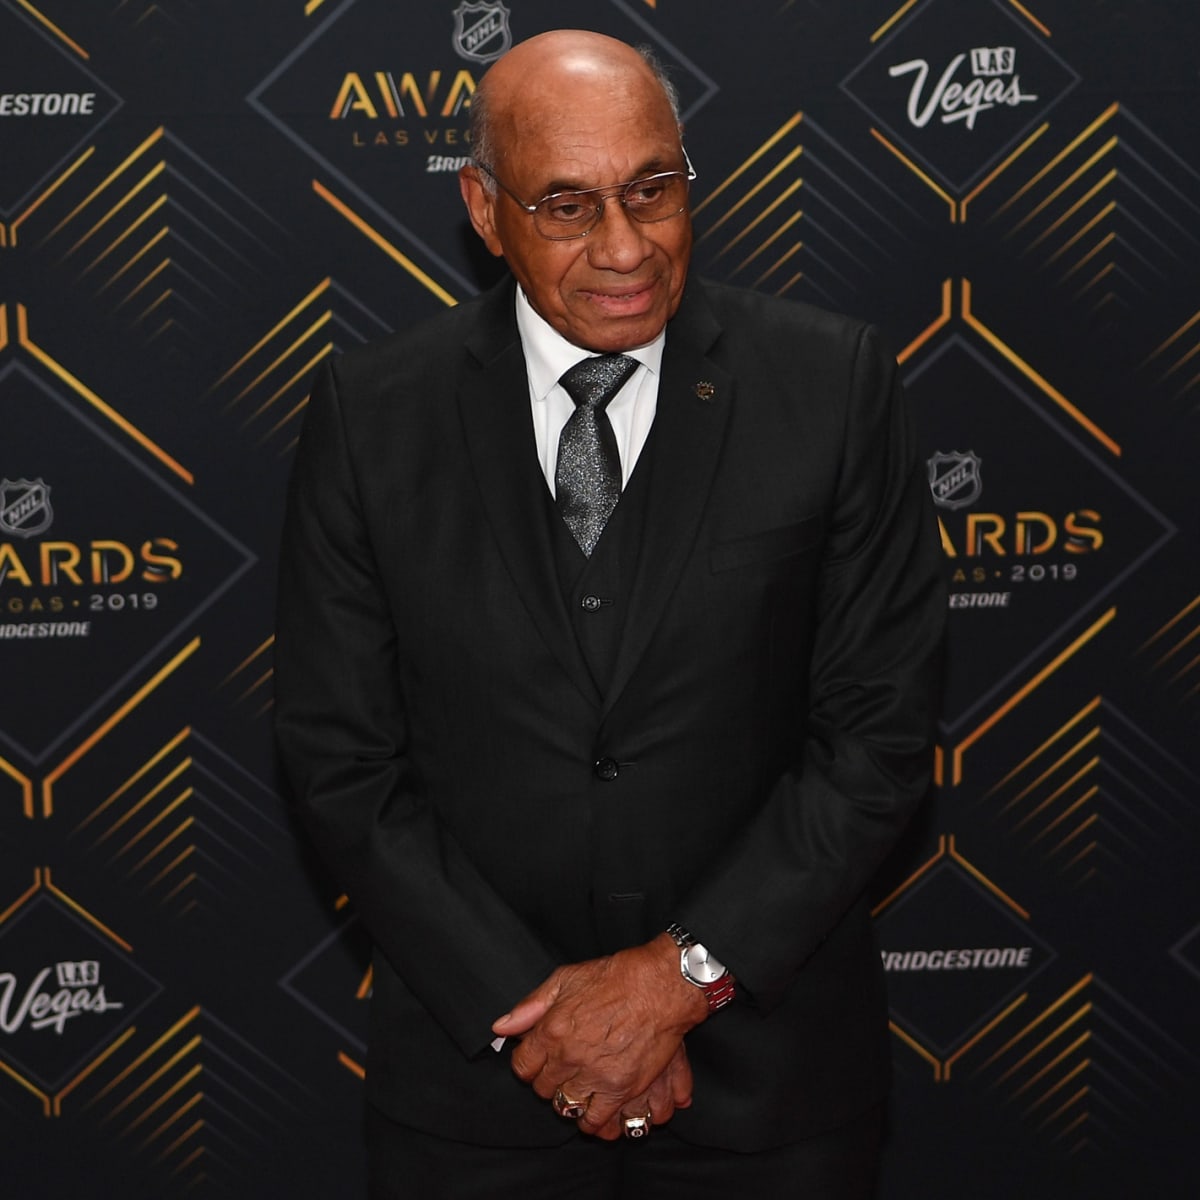 NHL's First Black Player Willie O'Ree to Receive Congressional Gold Medal